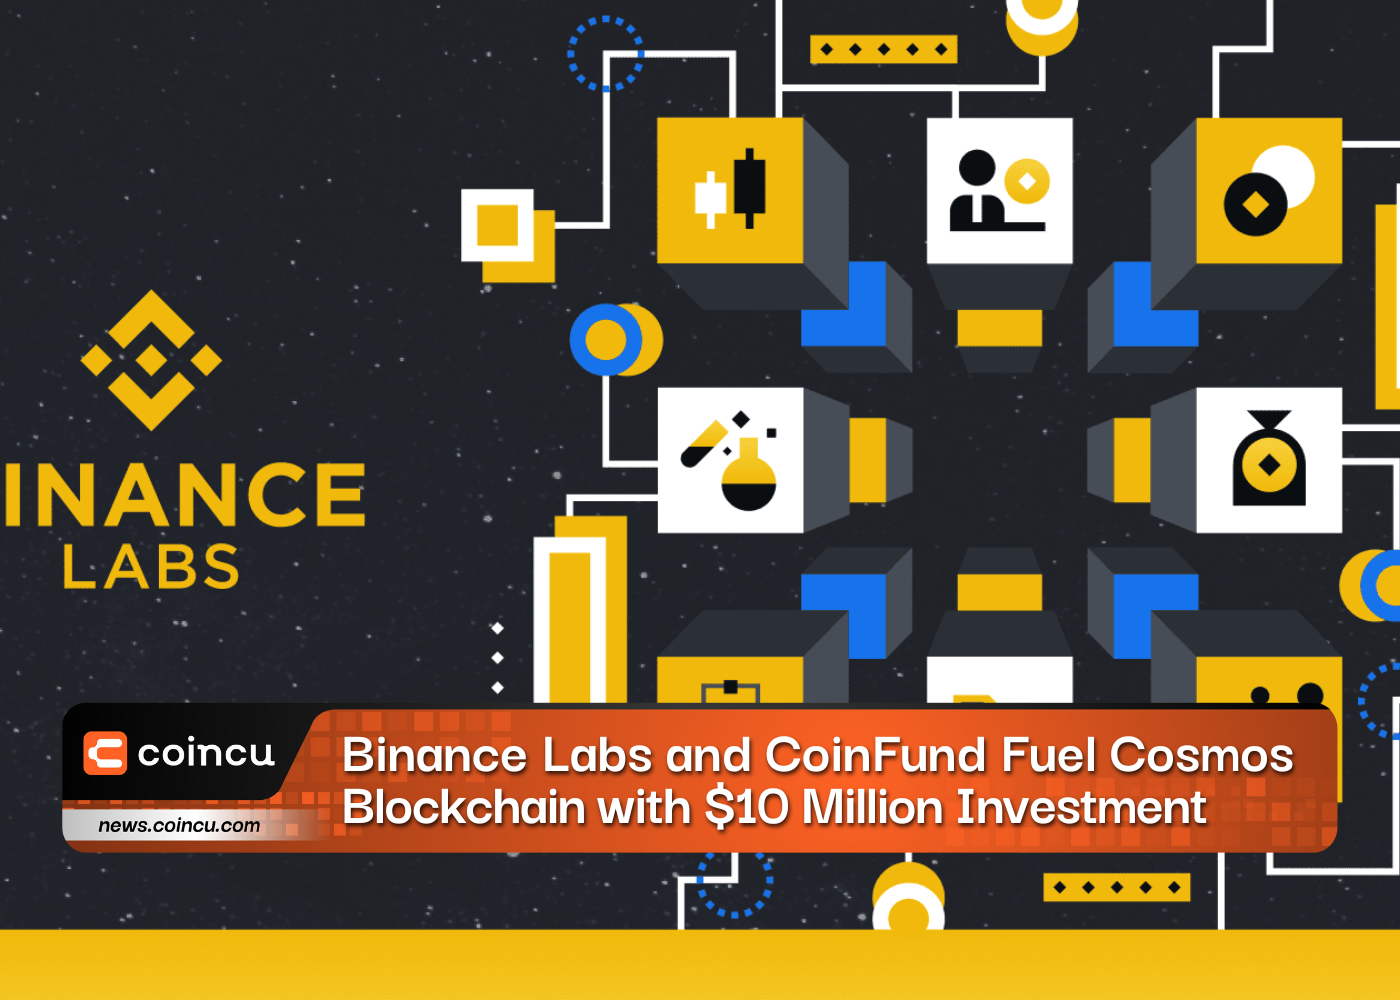 Binance Labs and CoinFund Fuel Cosmos